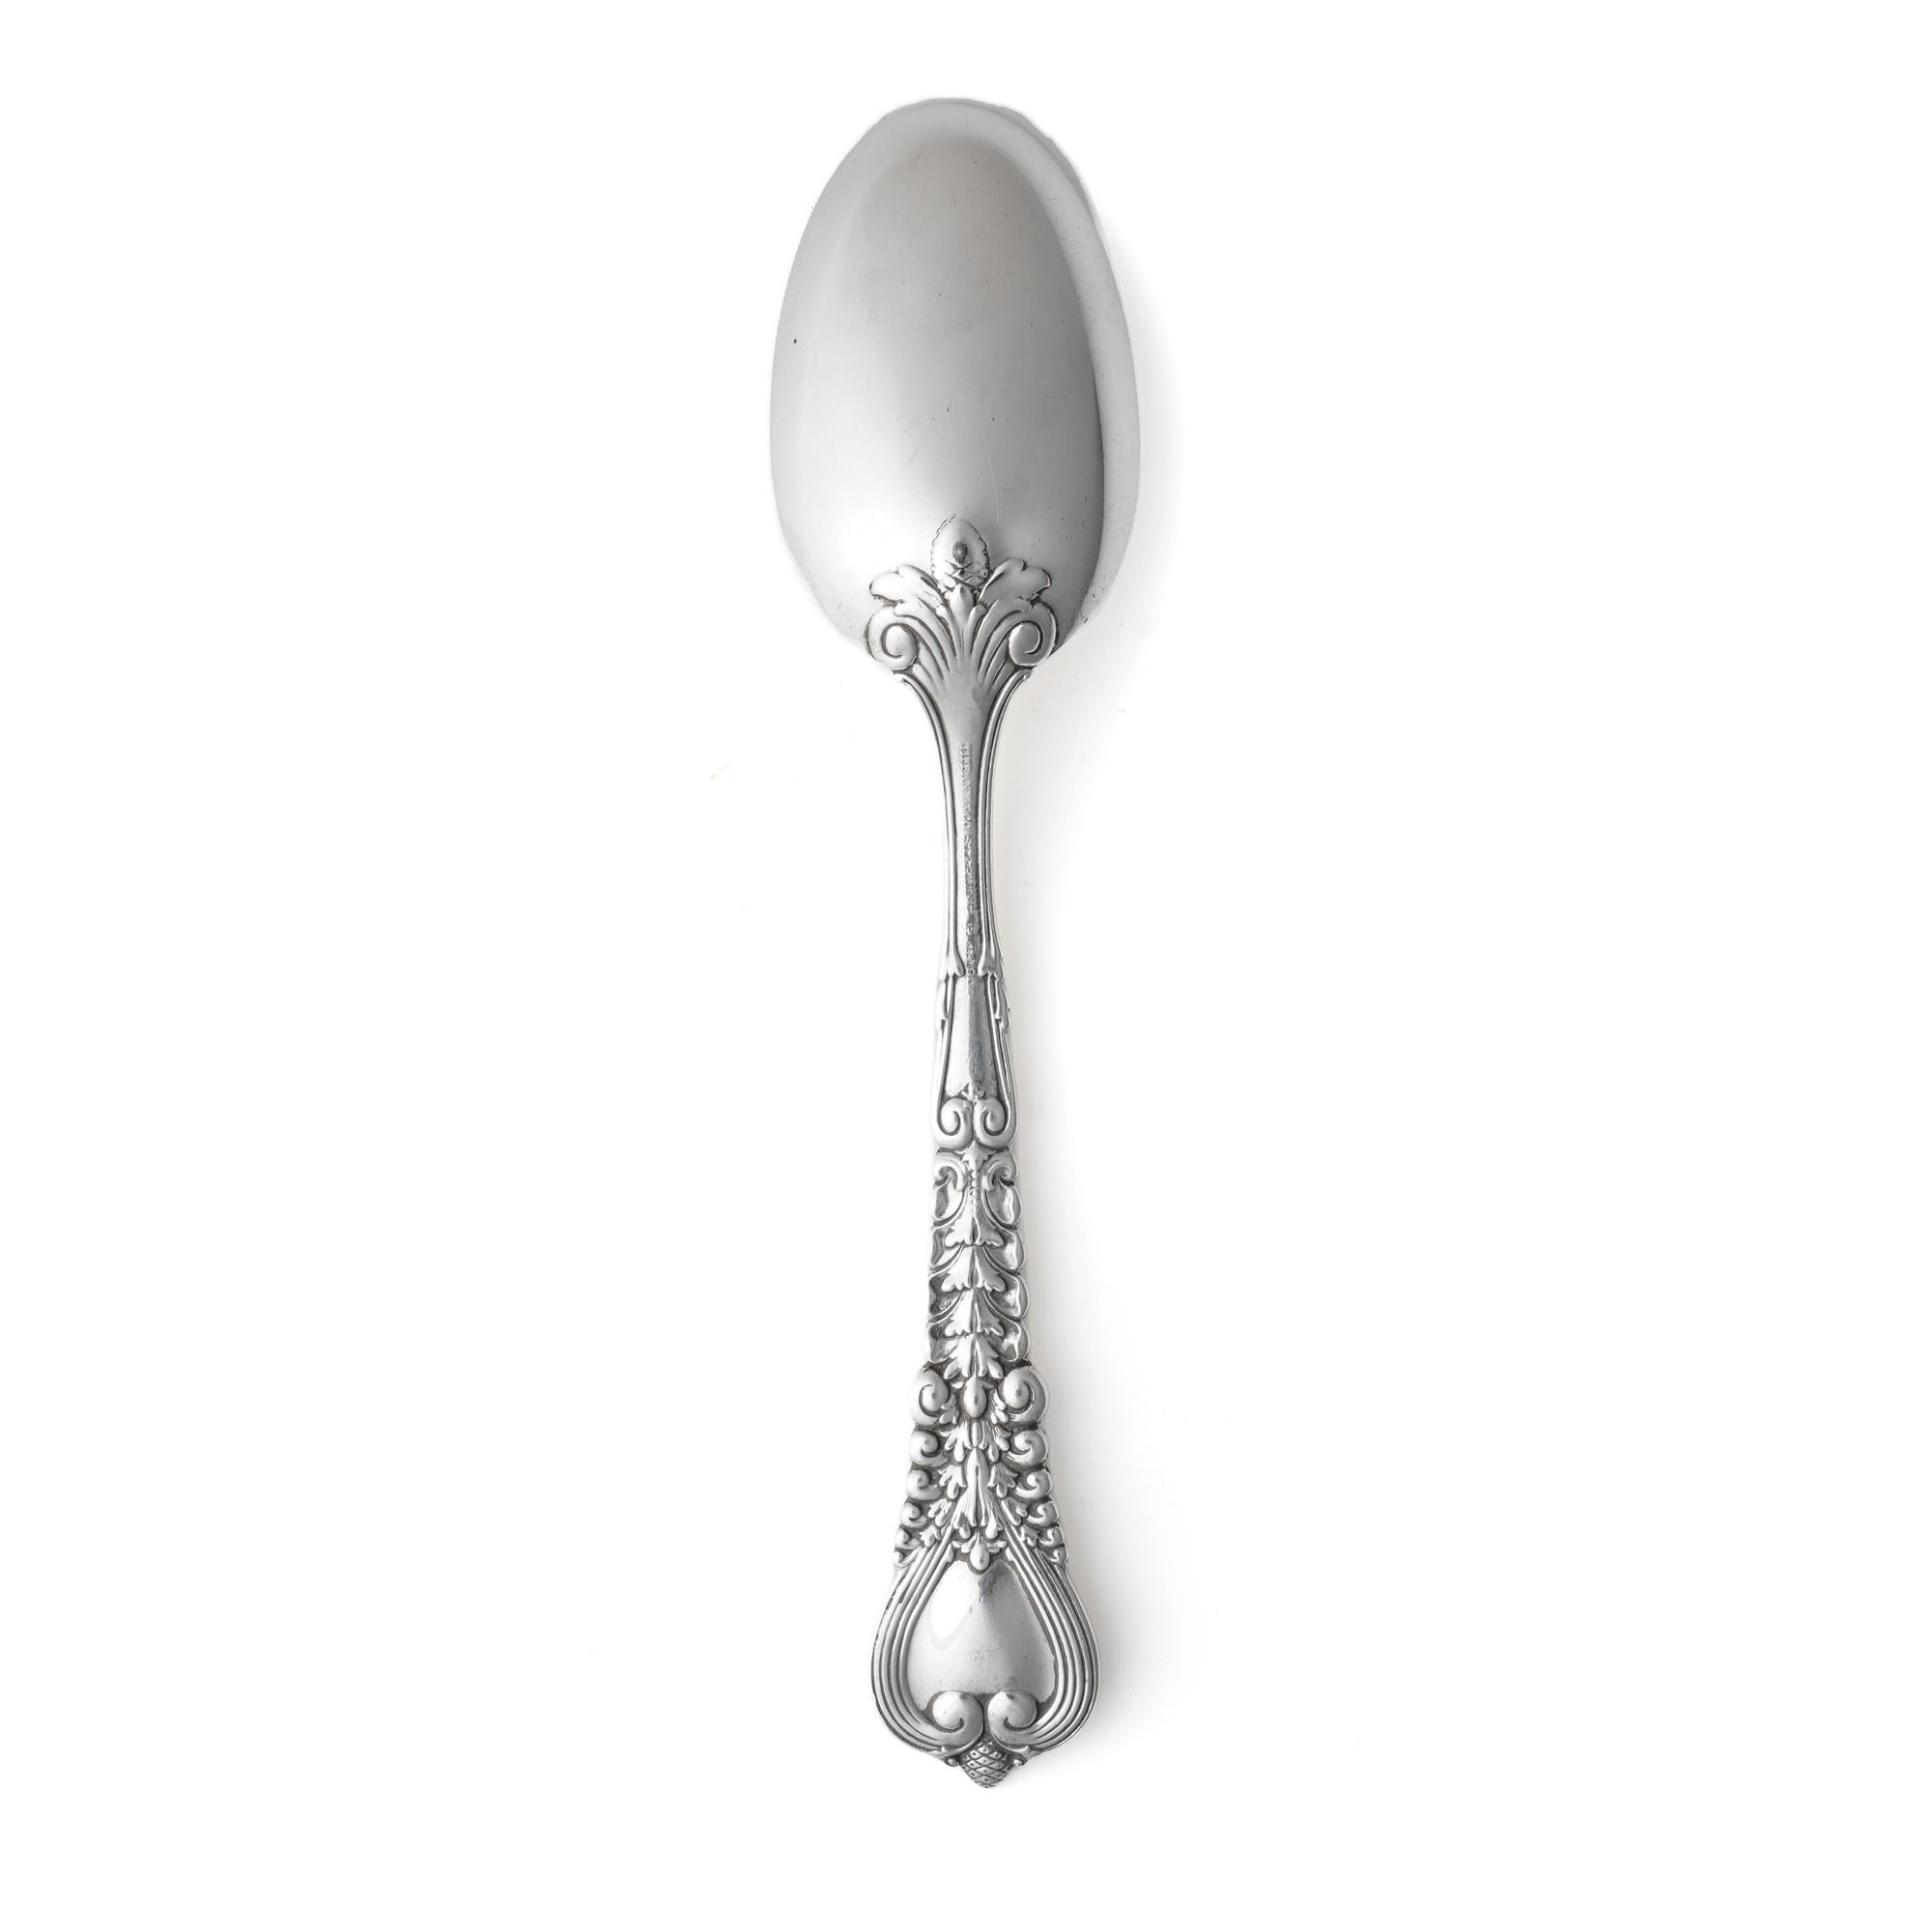 Early 20th Century Antique Tiffany & Co. Sterling Silver Florentine Pattern Dessert Spoon For Sale